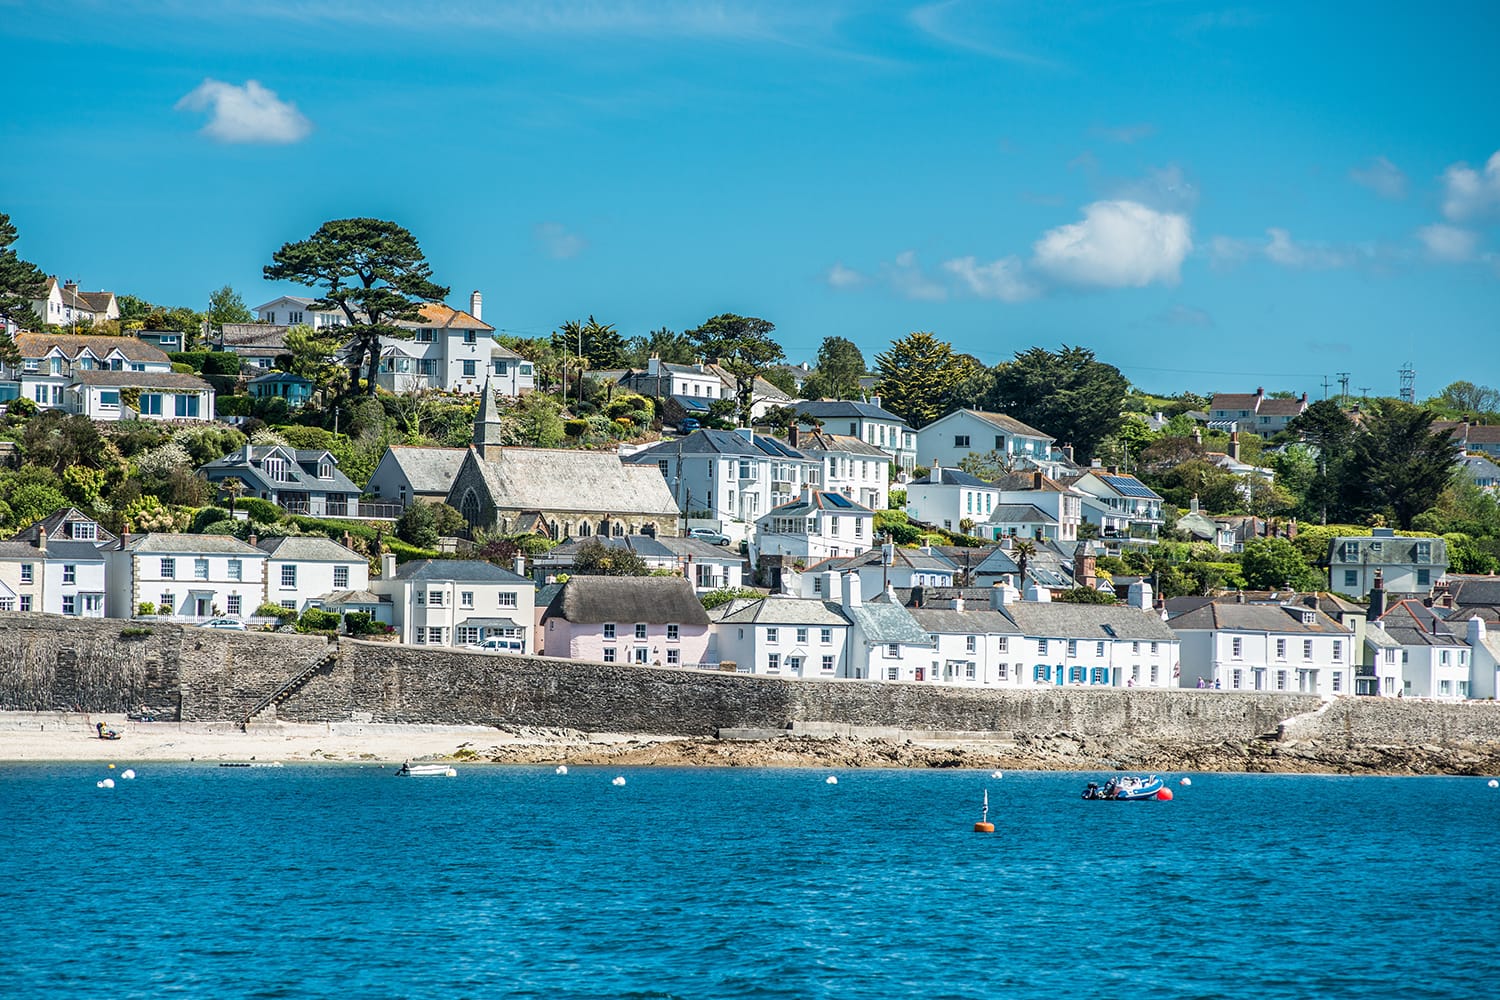 The picturesque village of St Mawes on the Roseland Peninsula near Falmouth in Cornwall, England, UK.